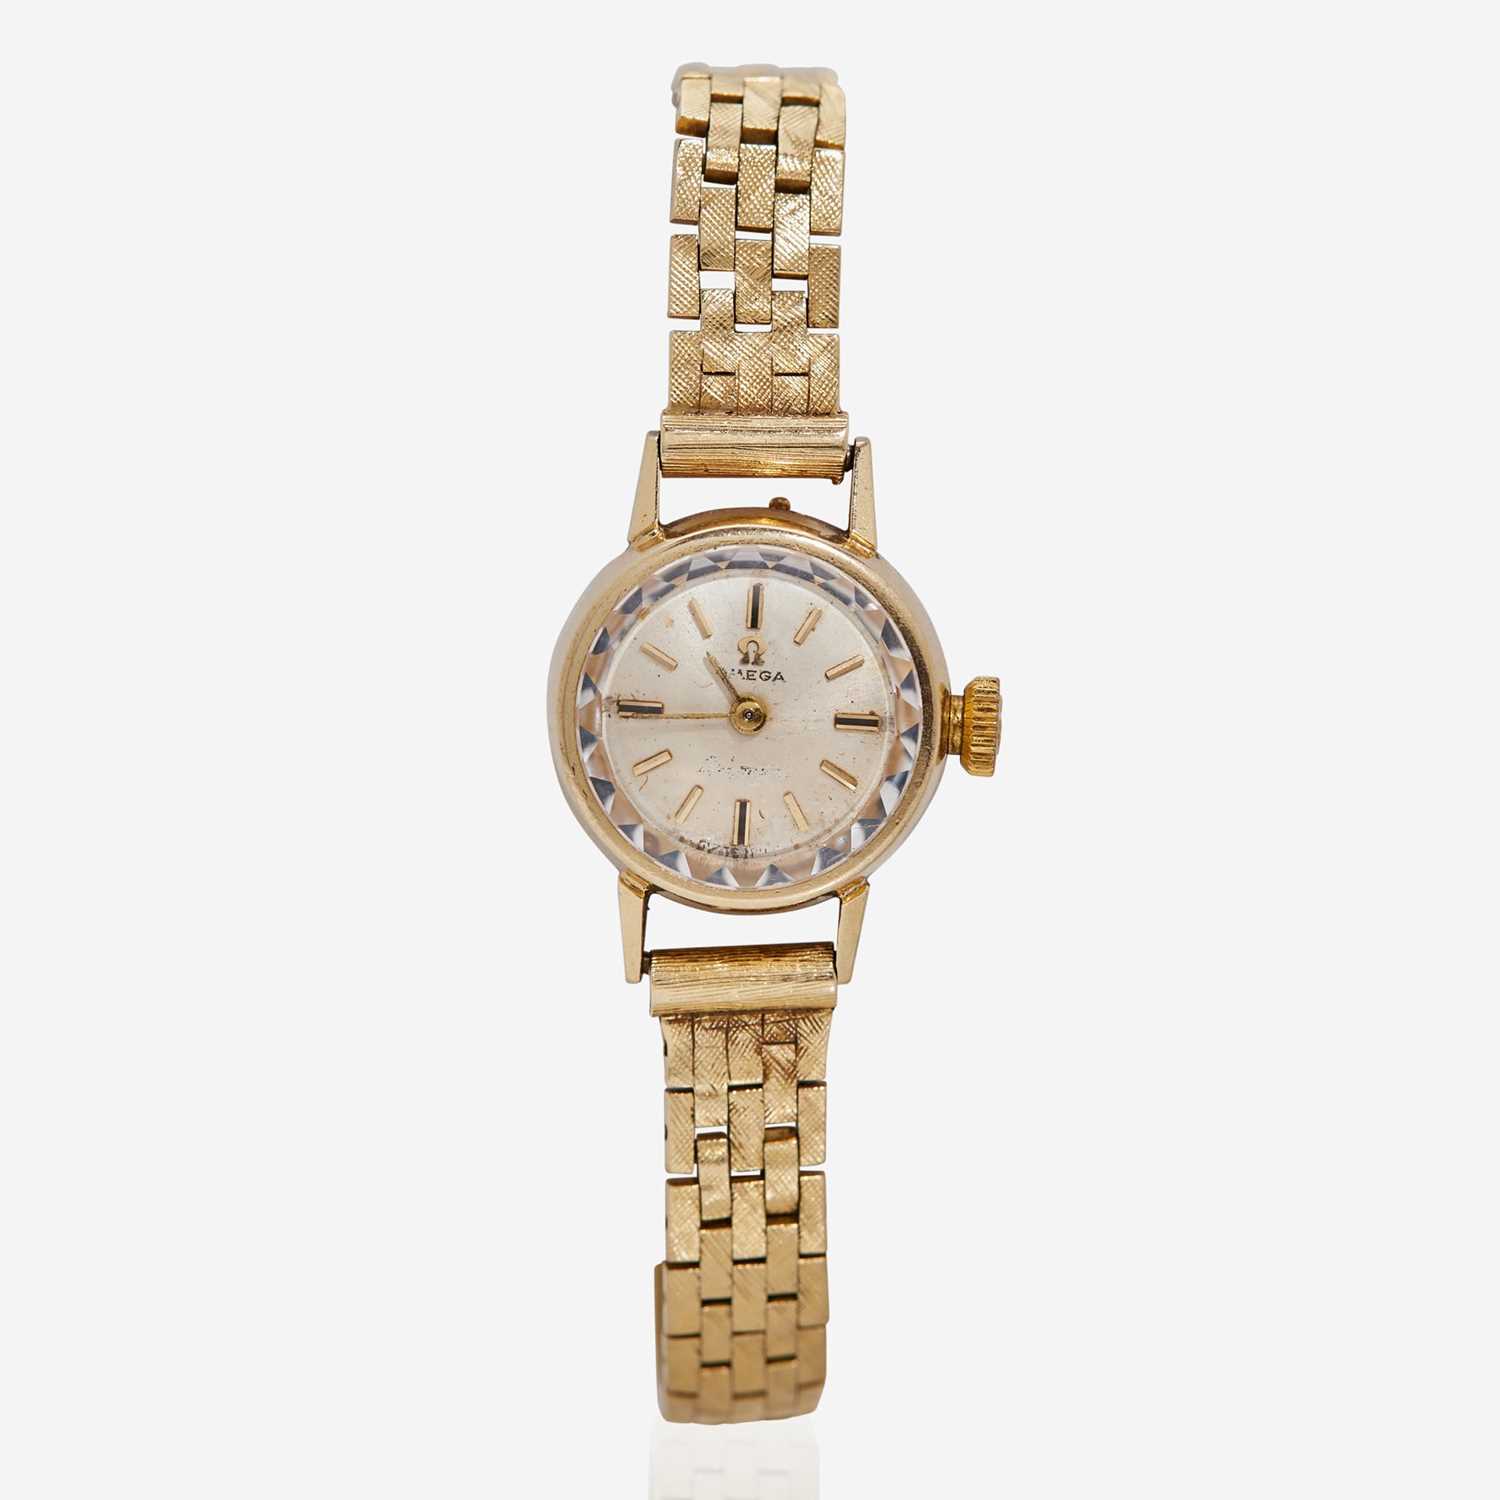 Lot 74 - A 14K Yellow Gold Omega Watch